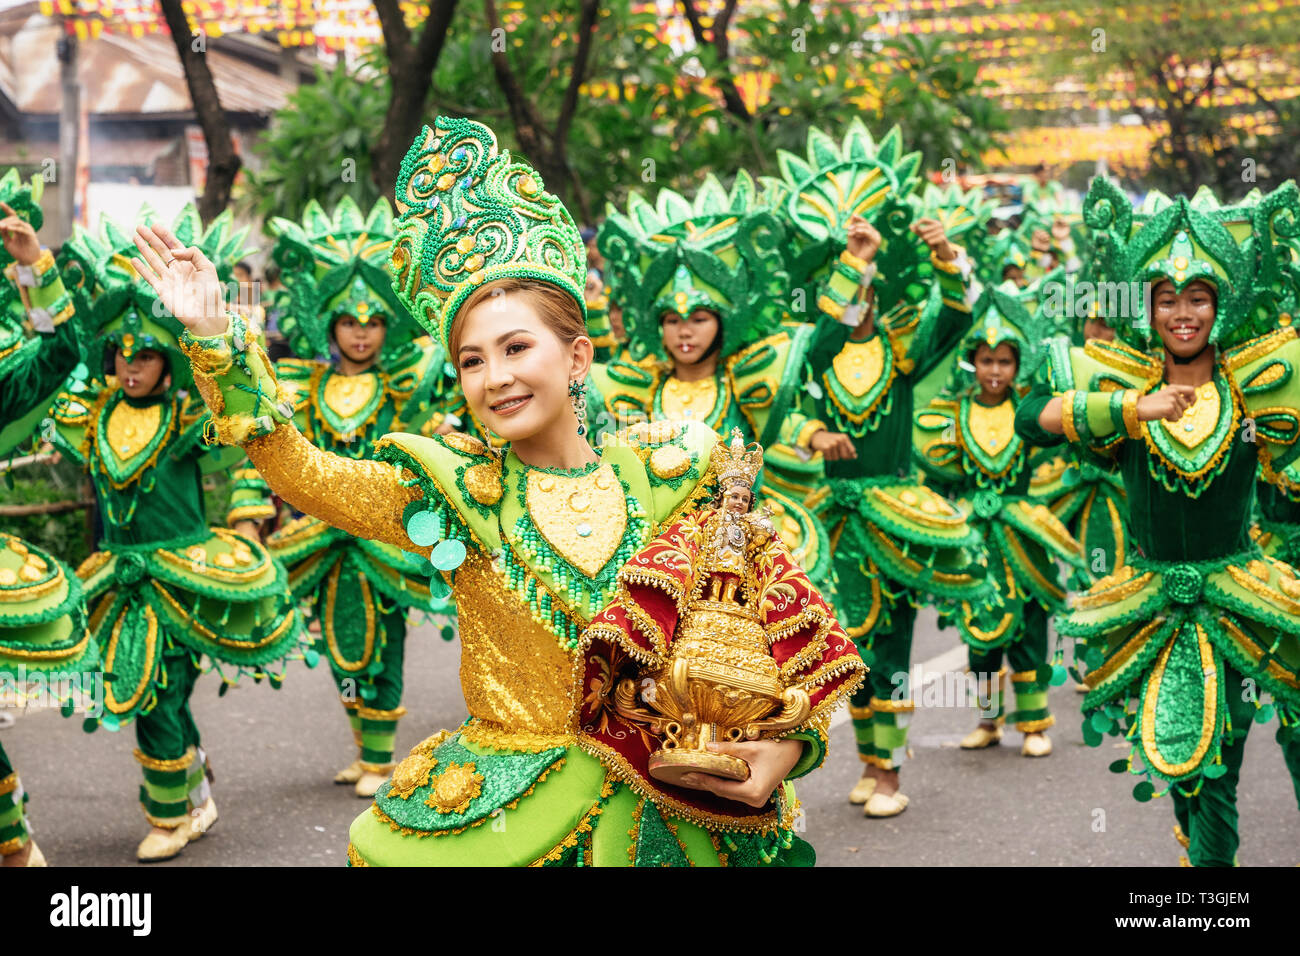 Cebu City , The Philippines - January 20, 2019: Street dancers in vivid colorful costumes participate in the parade at the Sinulog Festival. Stock Photo